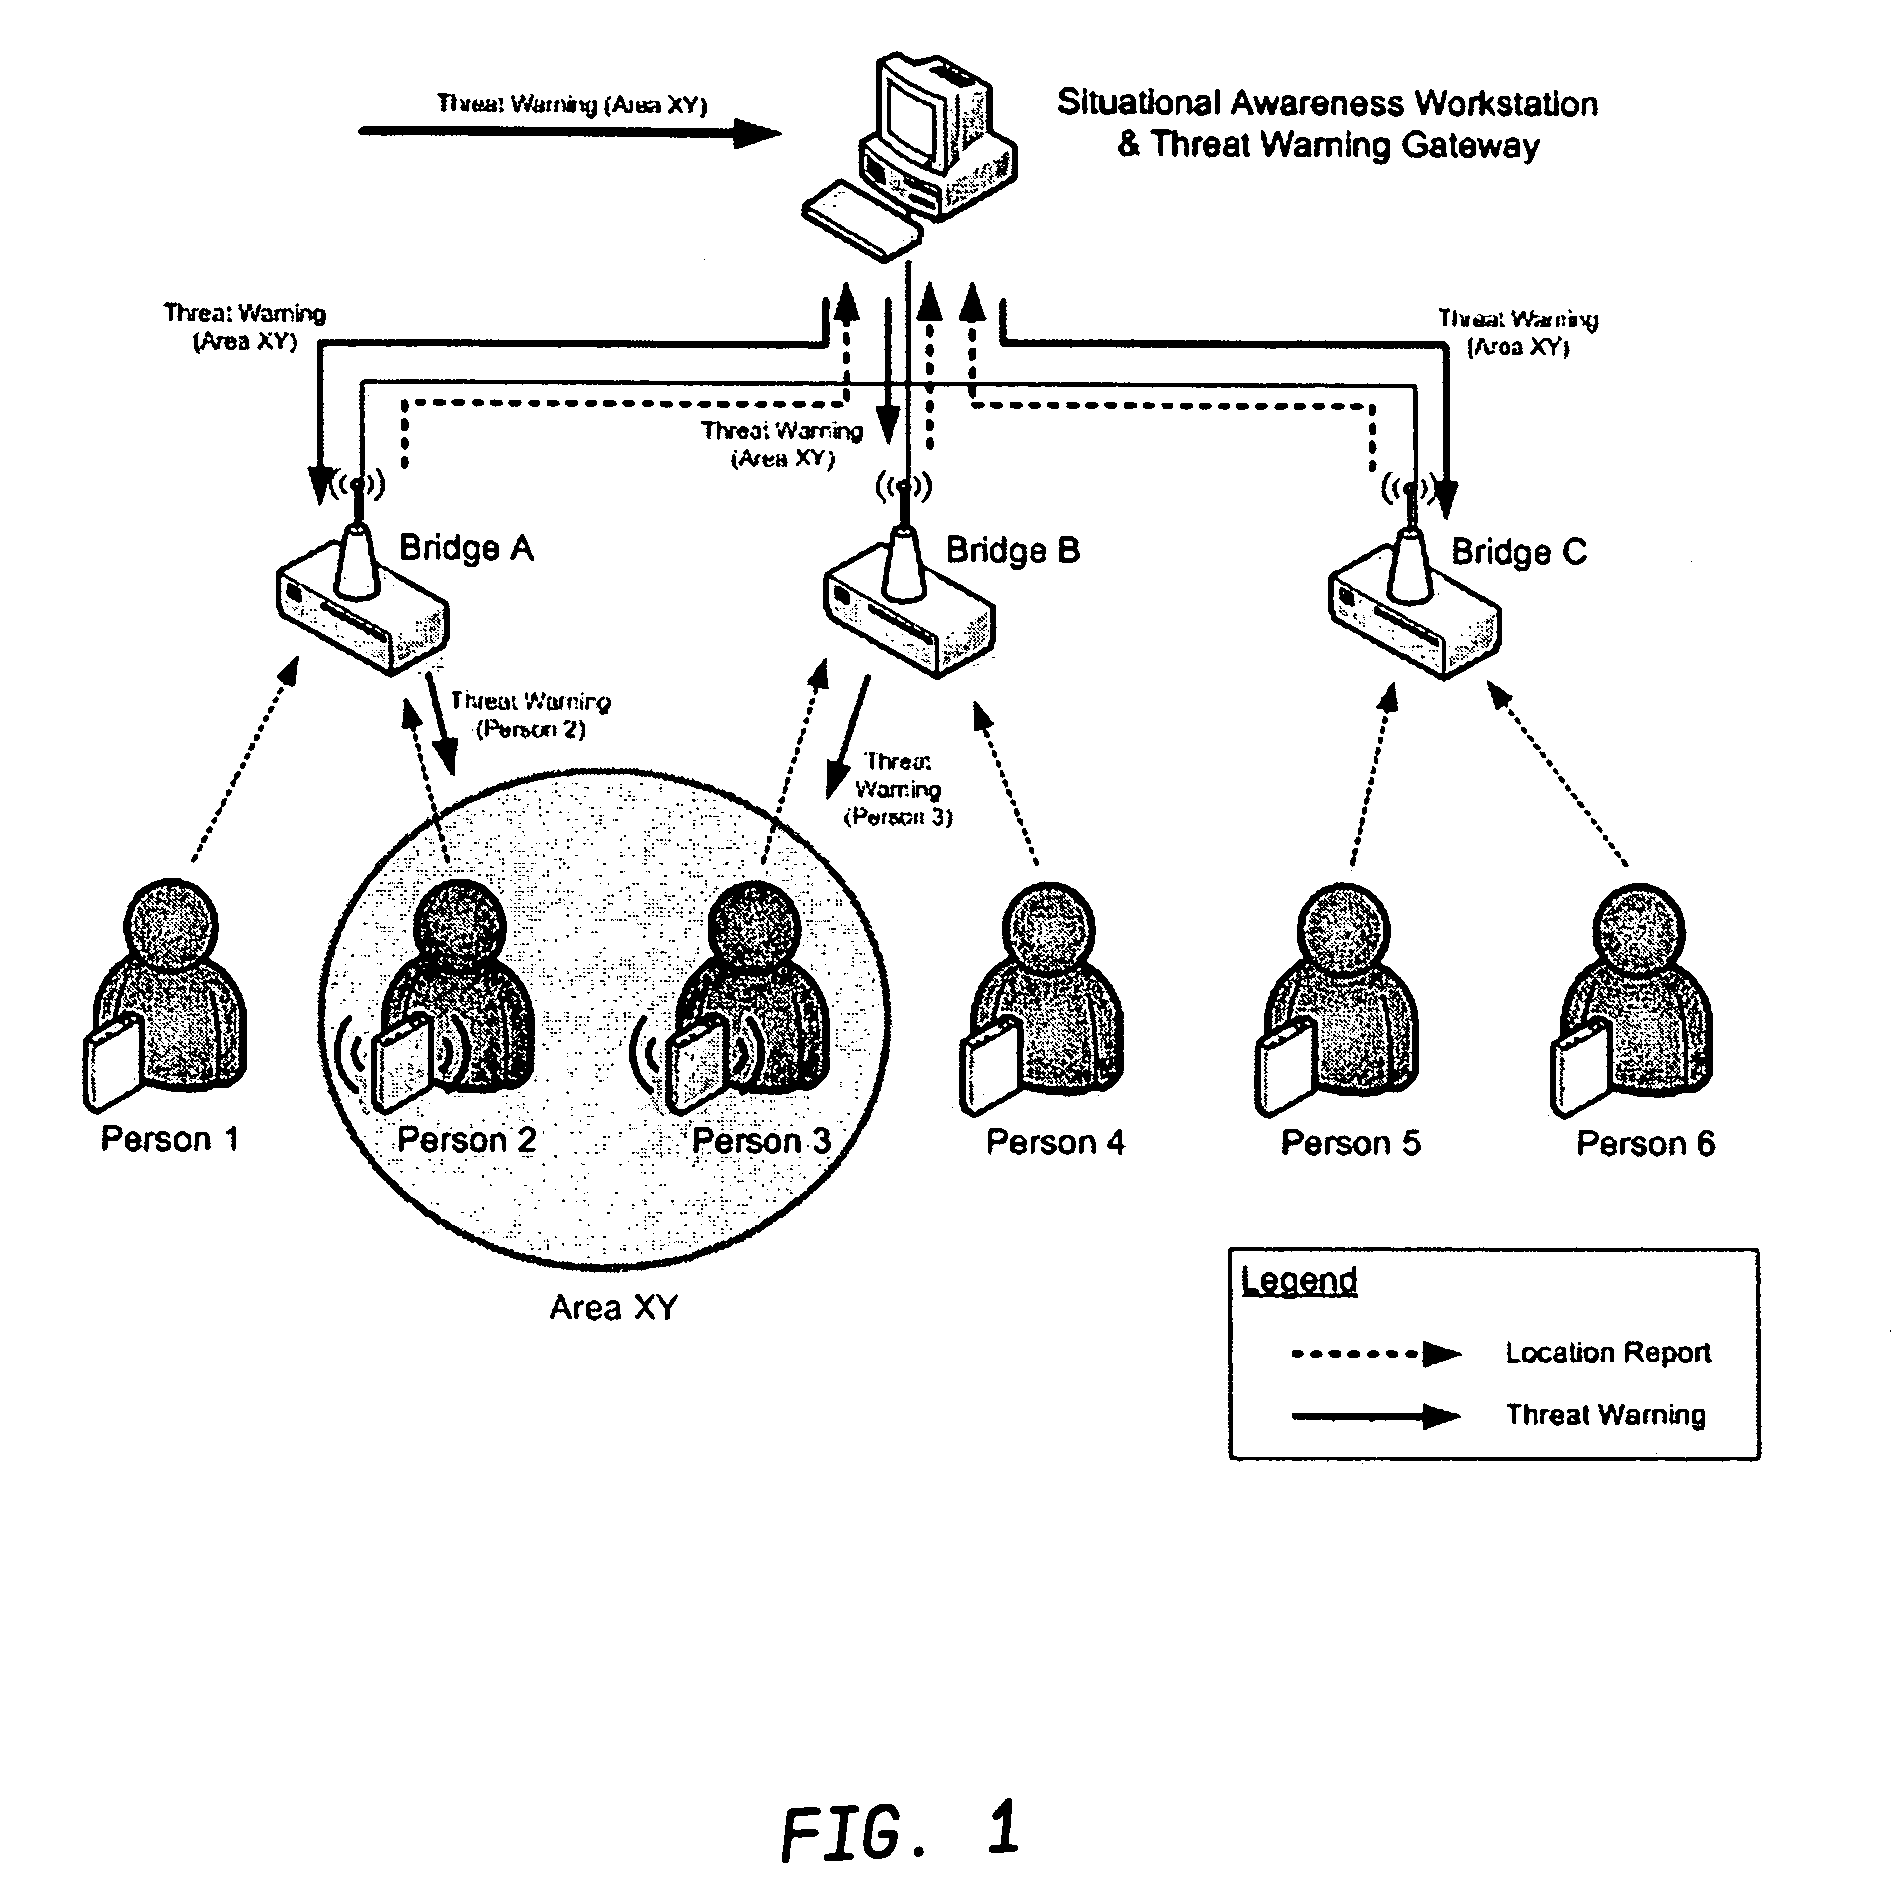 System and method for semi-distributed event warning notification for individual entities, and computer program product therefor